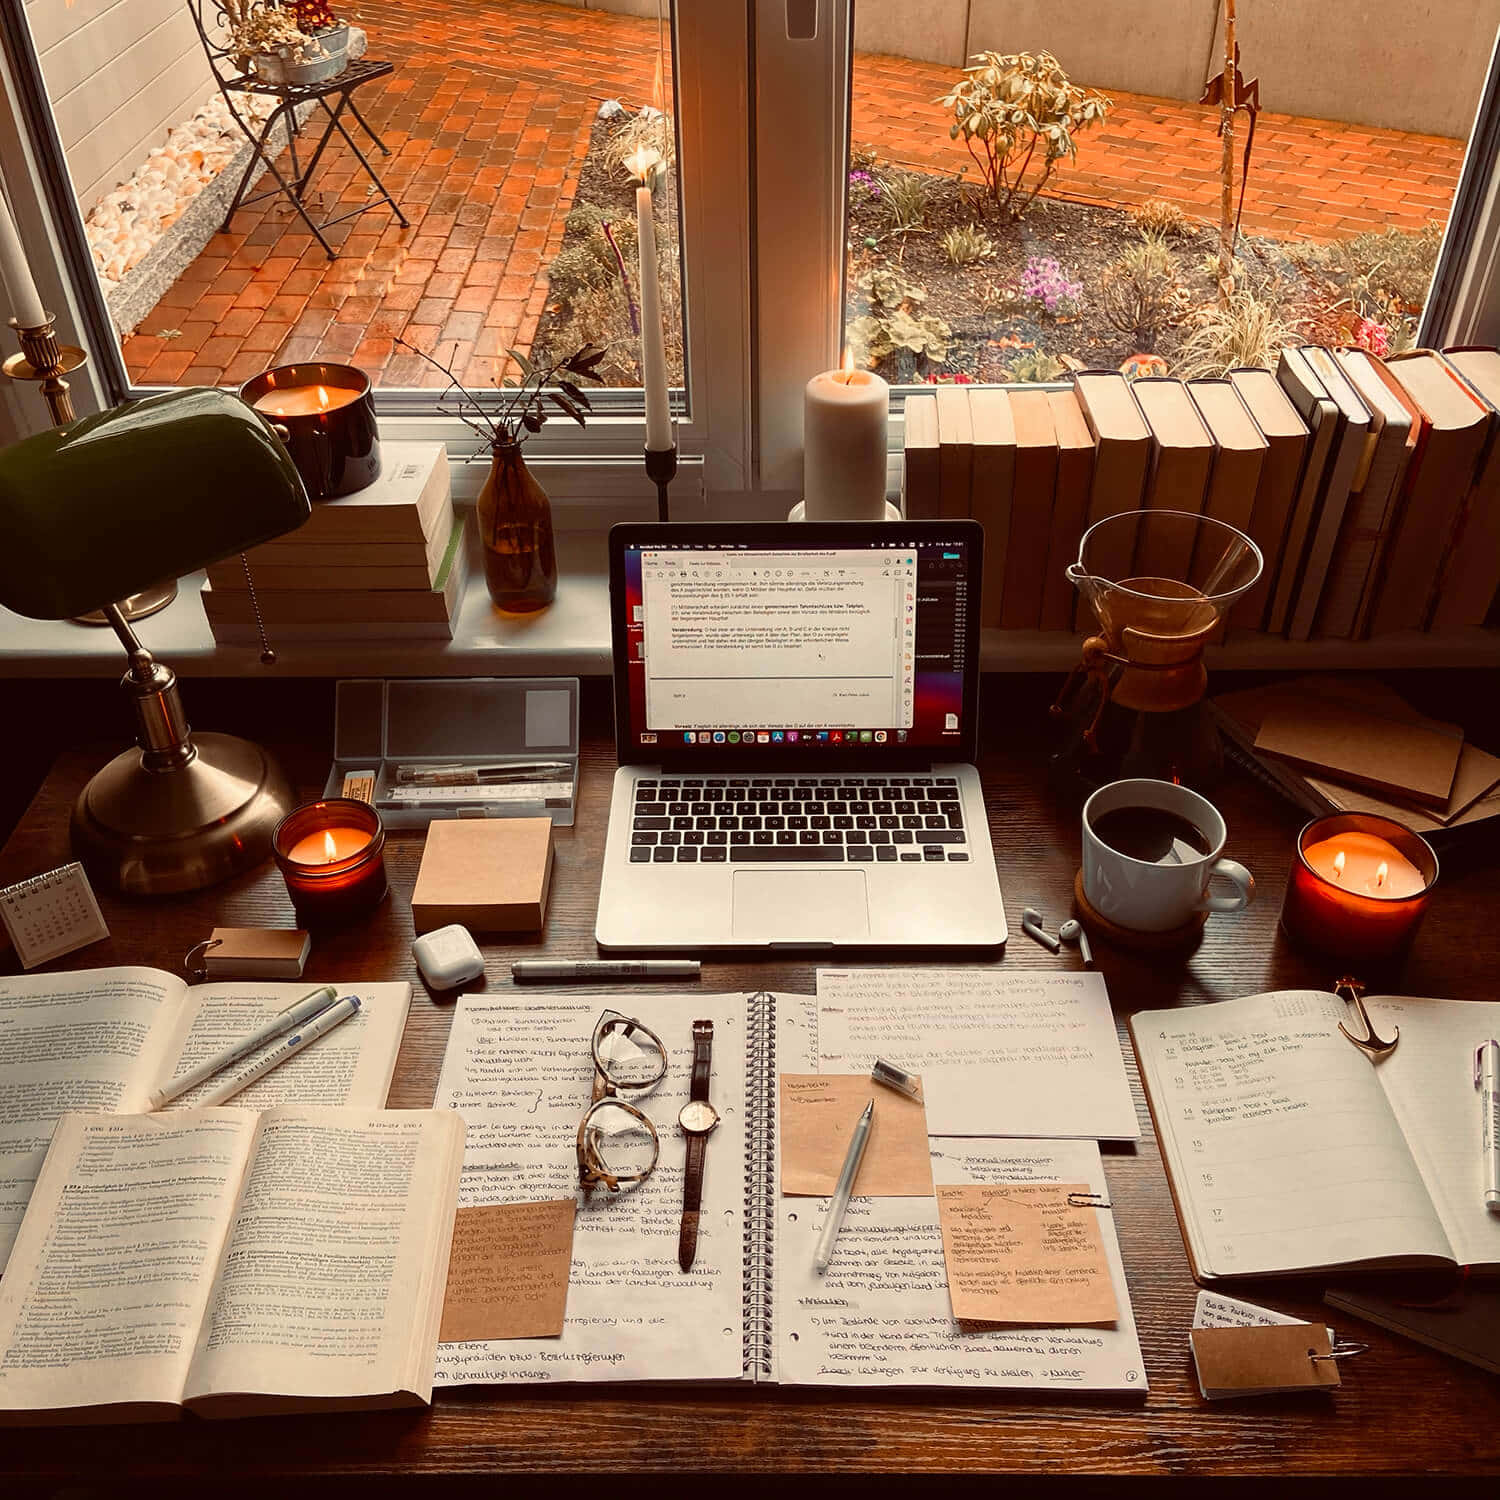 Cozy Home Office Study Session.jpg Wallpaper